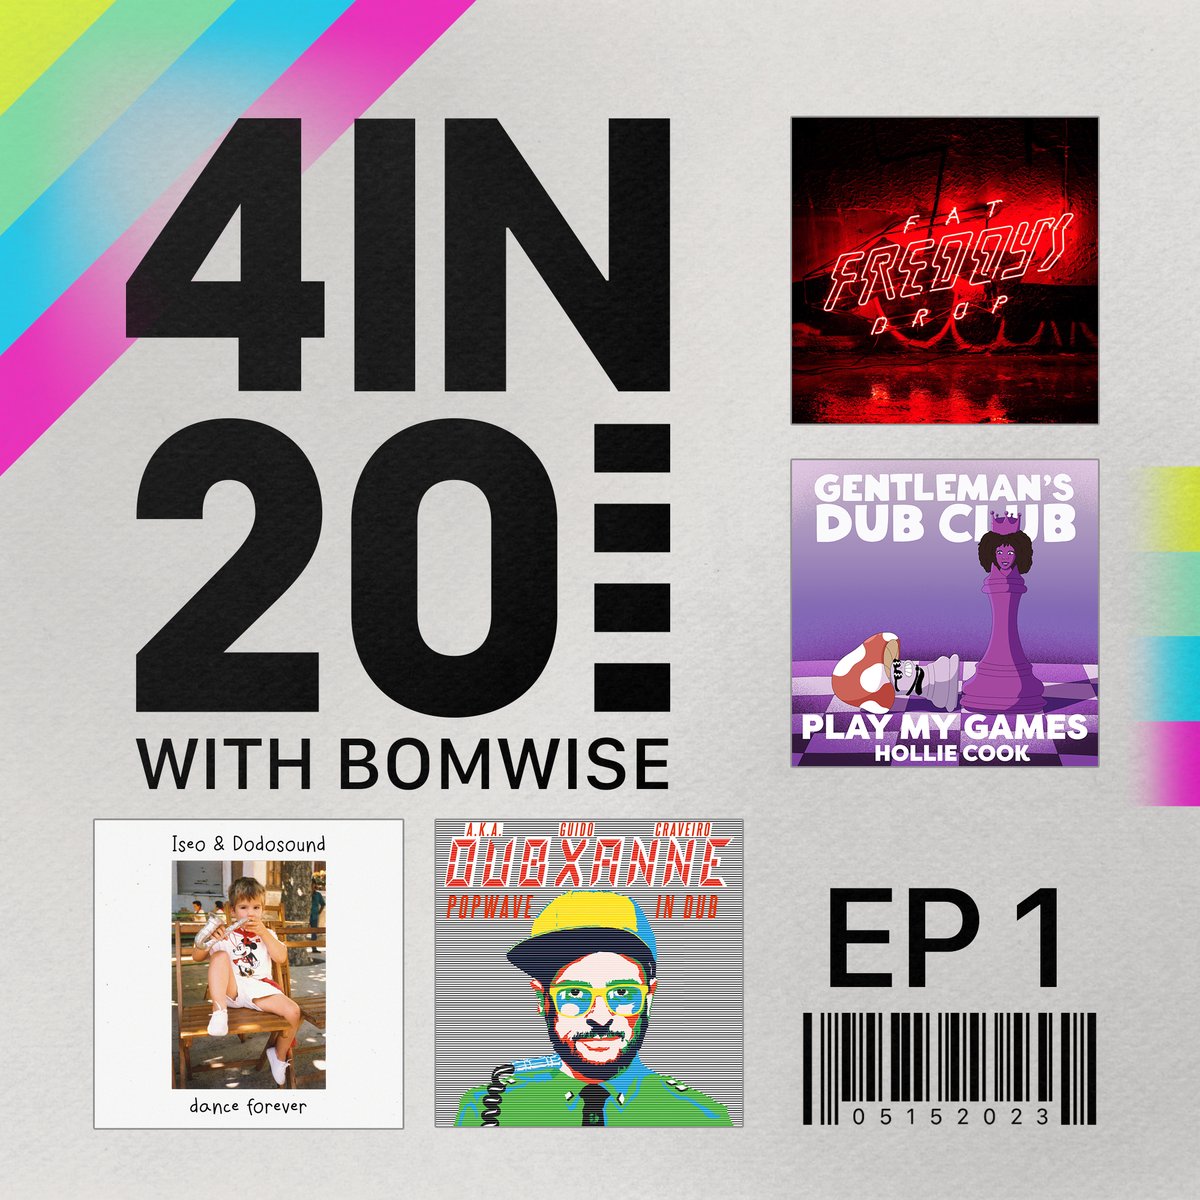 New Episode is out! 🔥👉 linktr.ee/4in20 👈
.
.
.
#4in20 #UnconventionalReggae #musicreview #musicpodcast #musictalk #ReggaePodcast #reggae #newreggae #musicdiscovery #musicrecommendations #Spotify #YouTube